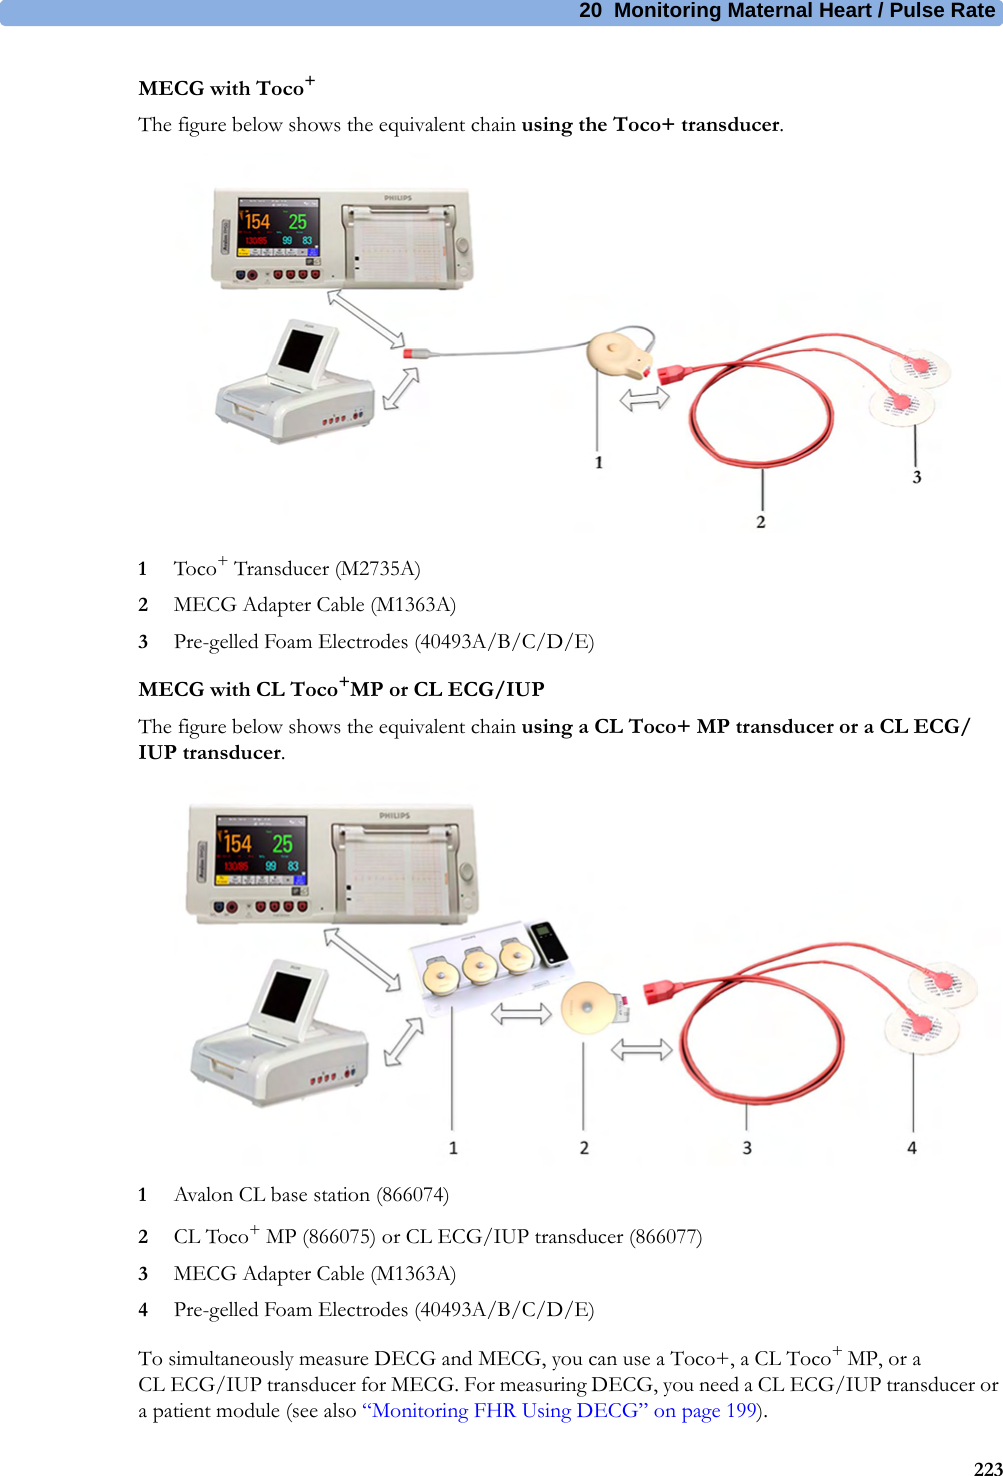 20  Monitoring Maternal Heart / Pulse Rate223MECG with Toco+The figure below shows the equivalent chain using the Toco+ transducer.1Toco+ Transducer (M2735A)2MECG Adapter Cable (M1363A)3Pre-gelled Foam Electrodes (40493A/B/C/D/E)MECG with CL Toco+MP or CL ECG/IUPThe figure below shows the equivalent chain using a CL Toco+ MP transducer or a CL ECG/IUP transducer.1Avalon CL base station (866074)2CL Toco+ MP (866075) or CL ECG/IUP transducer (866077)3MECG Adapter Cable (M1363A)4Pre-gelled Foam Electrodes (40493A/B/C/D/E)To simultaneously measure DECG and MECG, you can use a Toco+, a CL Toco+ MP, or a CL ECG/IUP transducer for MECG. For measuring DECG, you need a CL ECG/IUP transducer or a patient module (see also “Monitoring FHR Using DECG” on page 199).